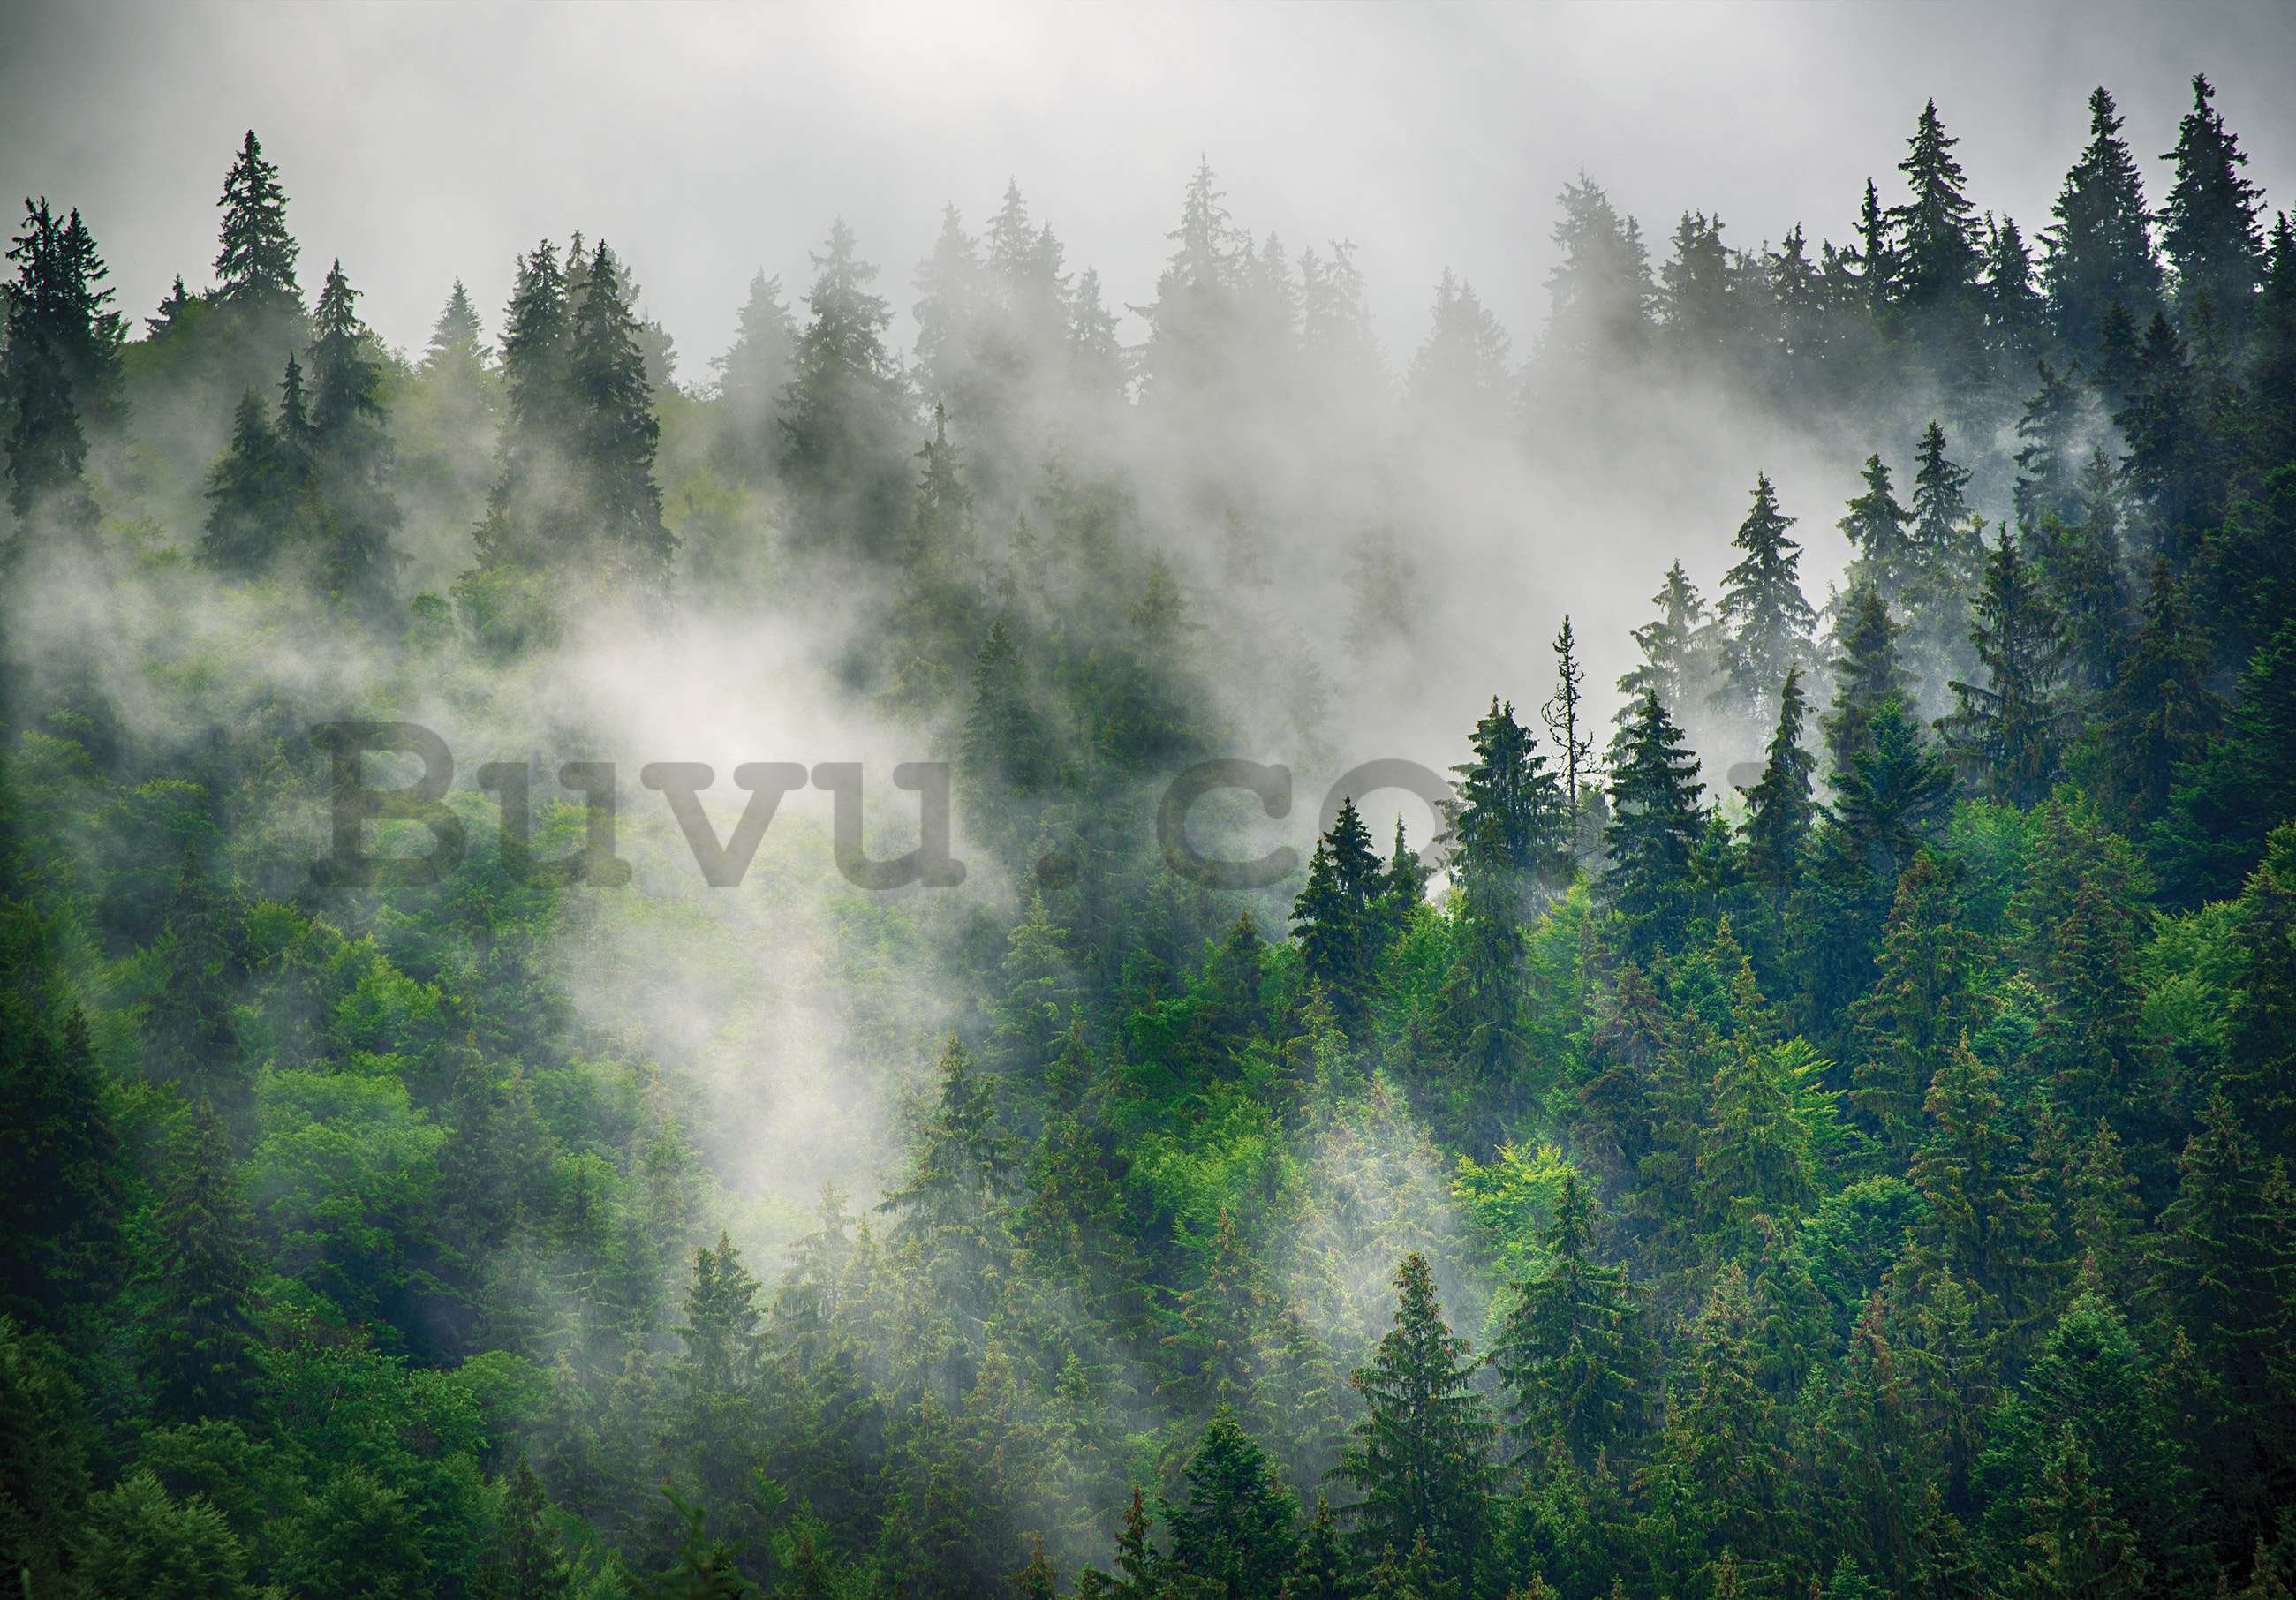 Wall mural vlies: Fog over the forest (5) - 254x184 cm